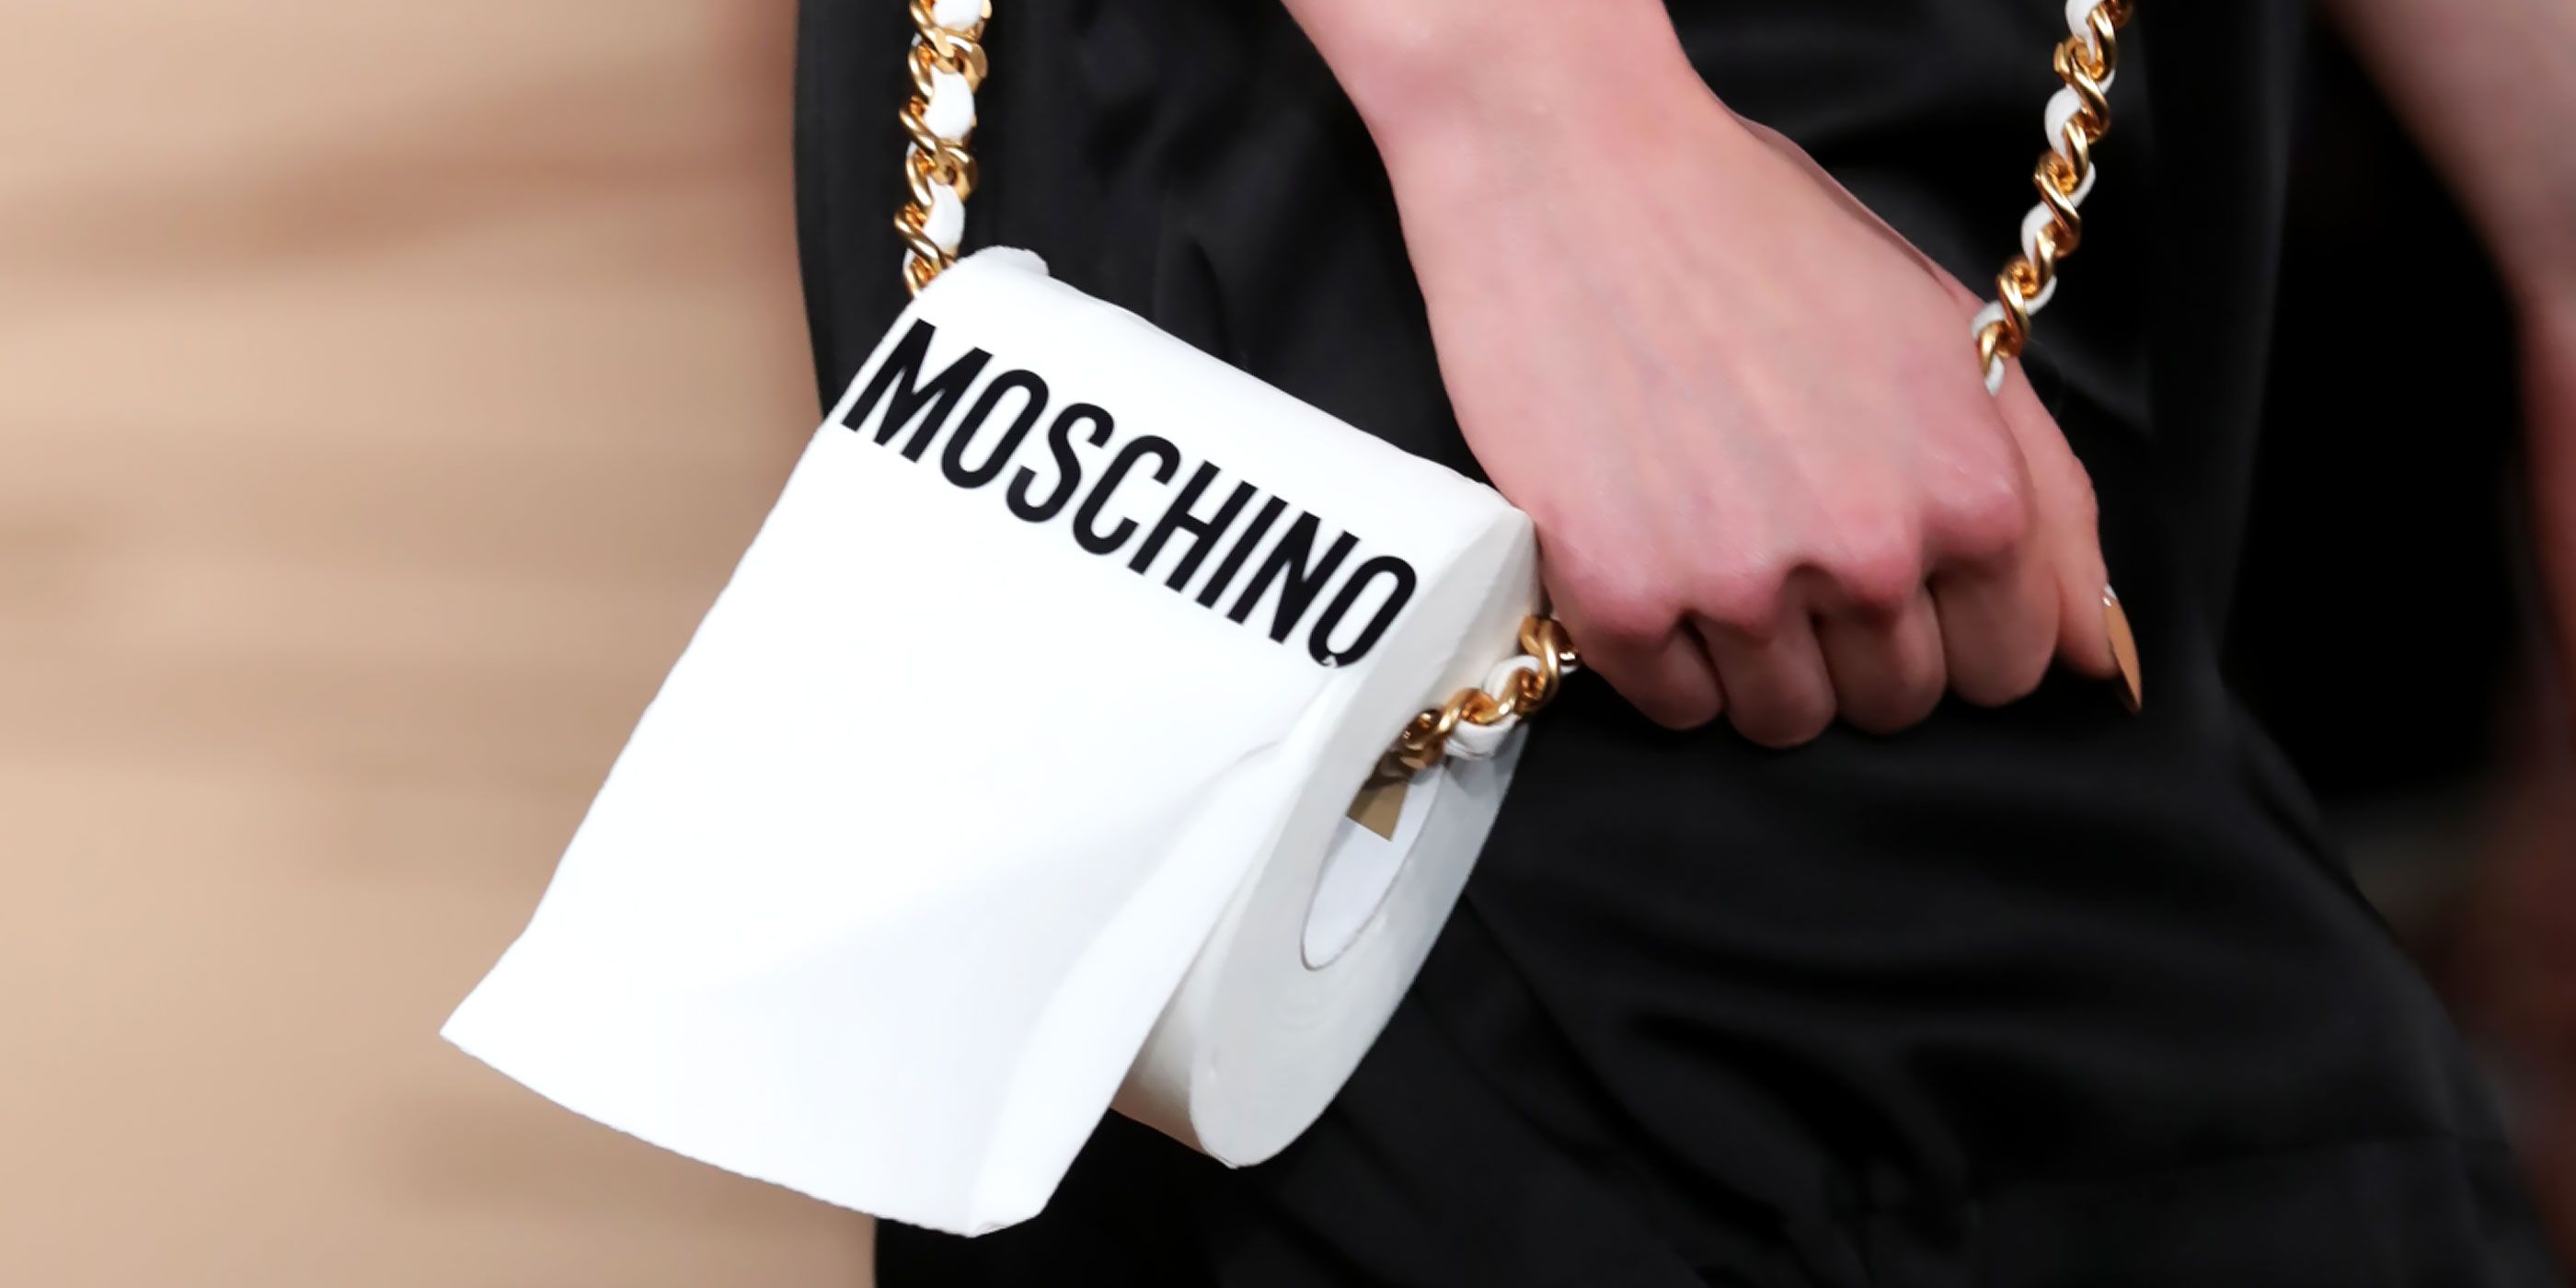 Moschino Bag Is a Roll of Toilet Paper 